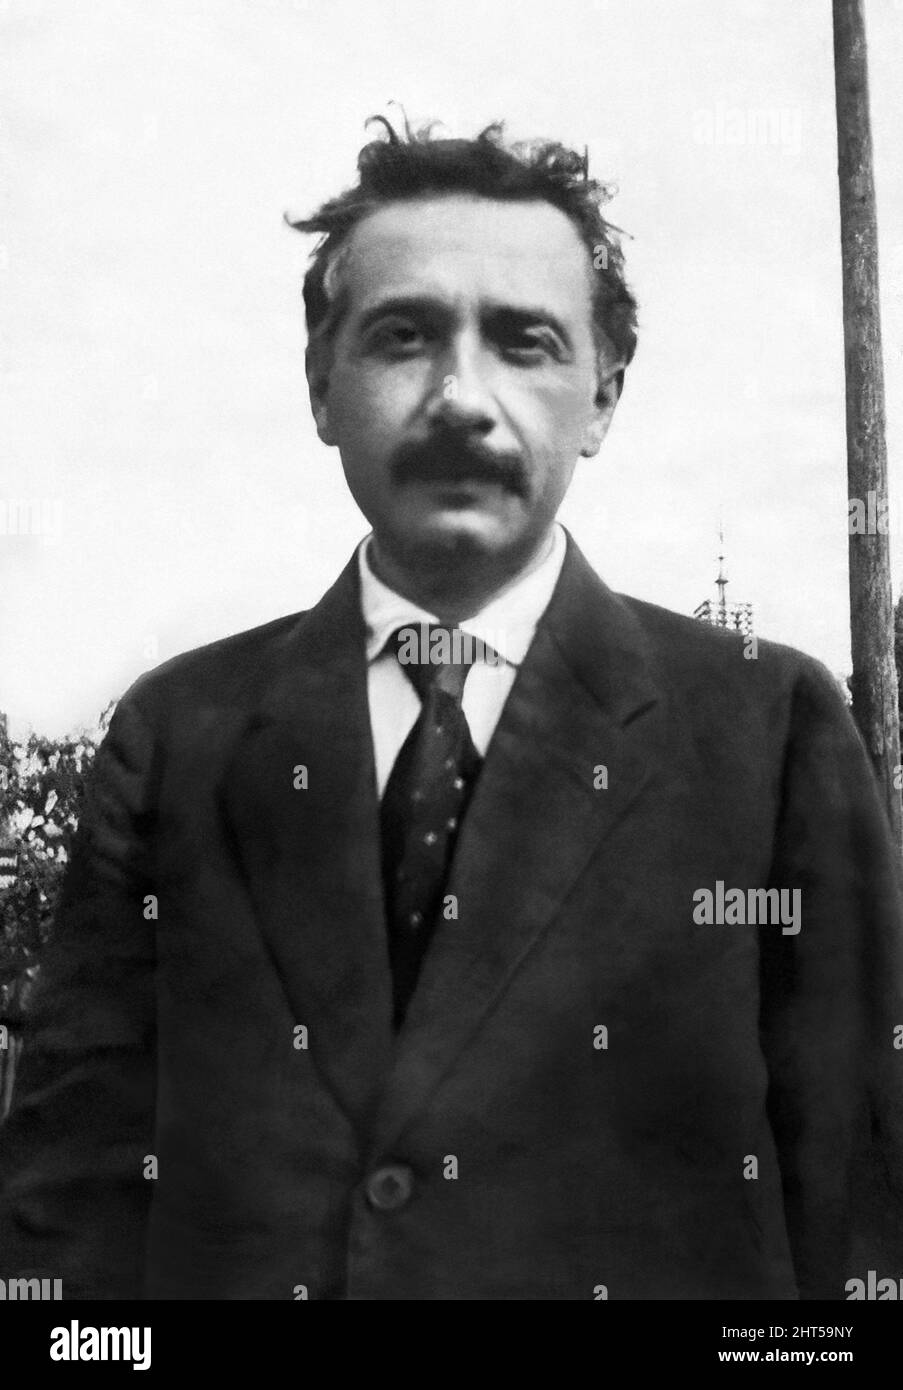 Albert Einstein (1879–1955), German-born theoretical physicist who developed the theory of relativity and would receive the 1921 Nobel Prize for Physics, in an outdoor portrait c1919. Stock Photo